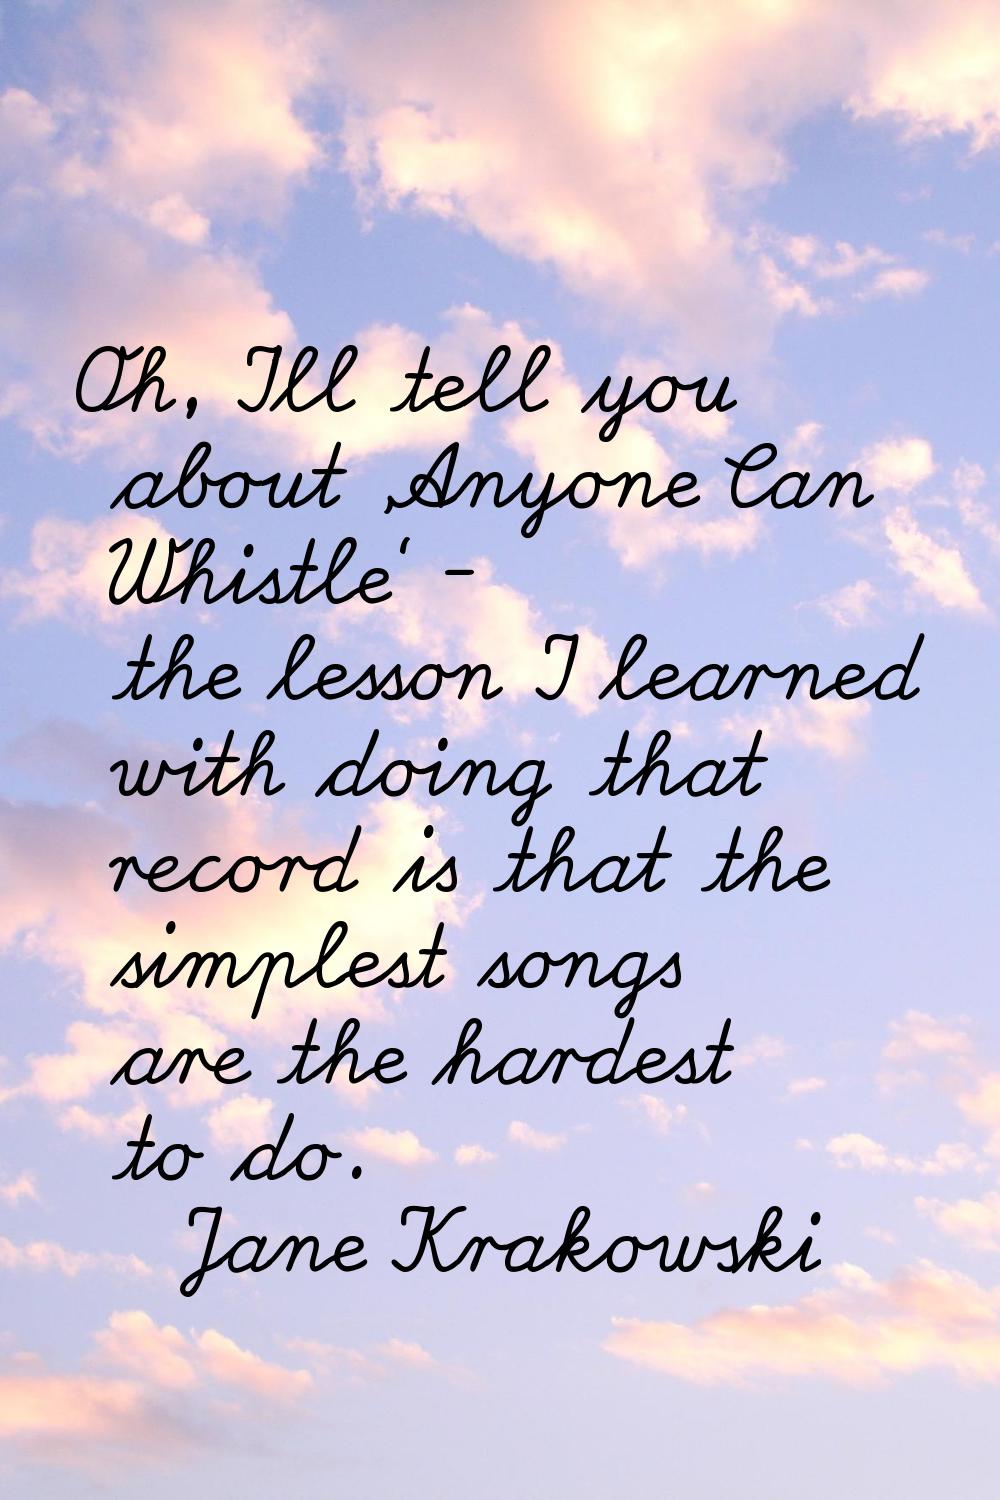 Oh, I'll tell you about 'Anyone Can Whistle' - the lesson I learned with doing that record is that 